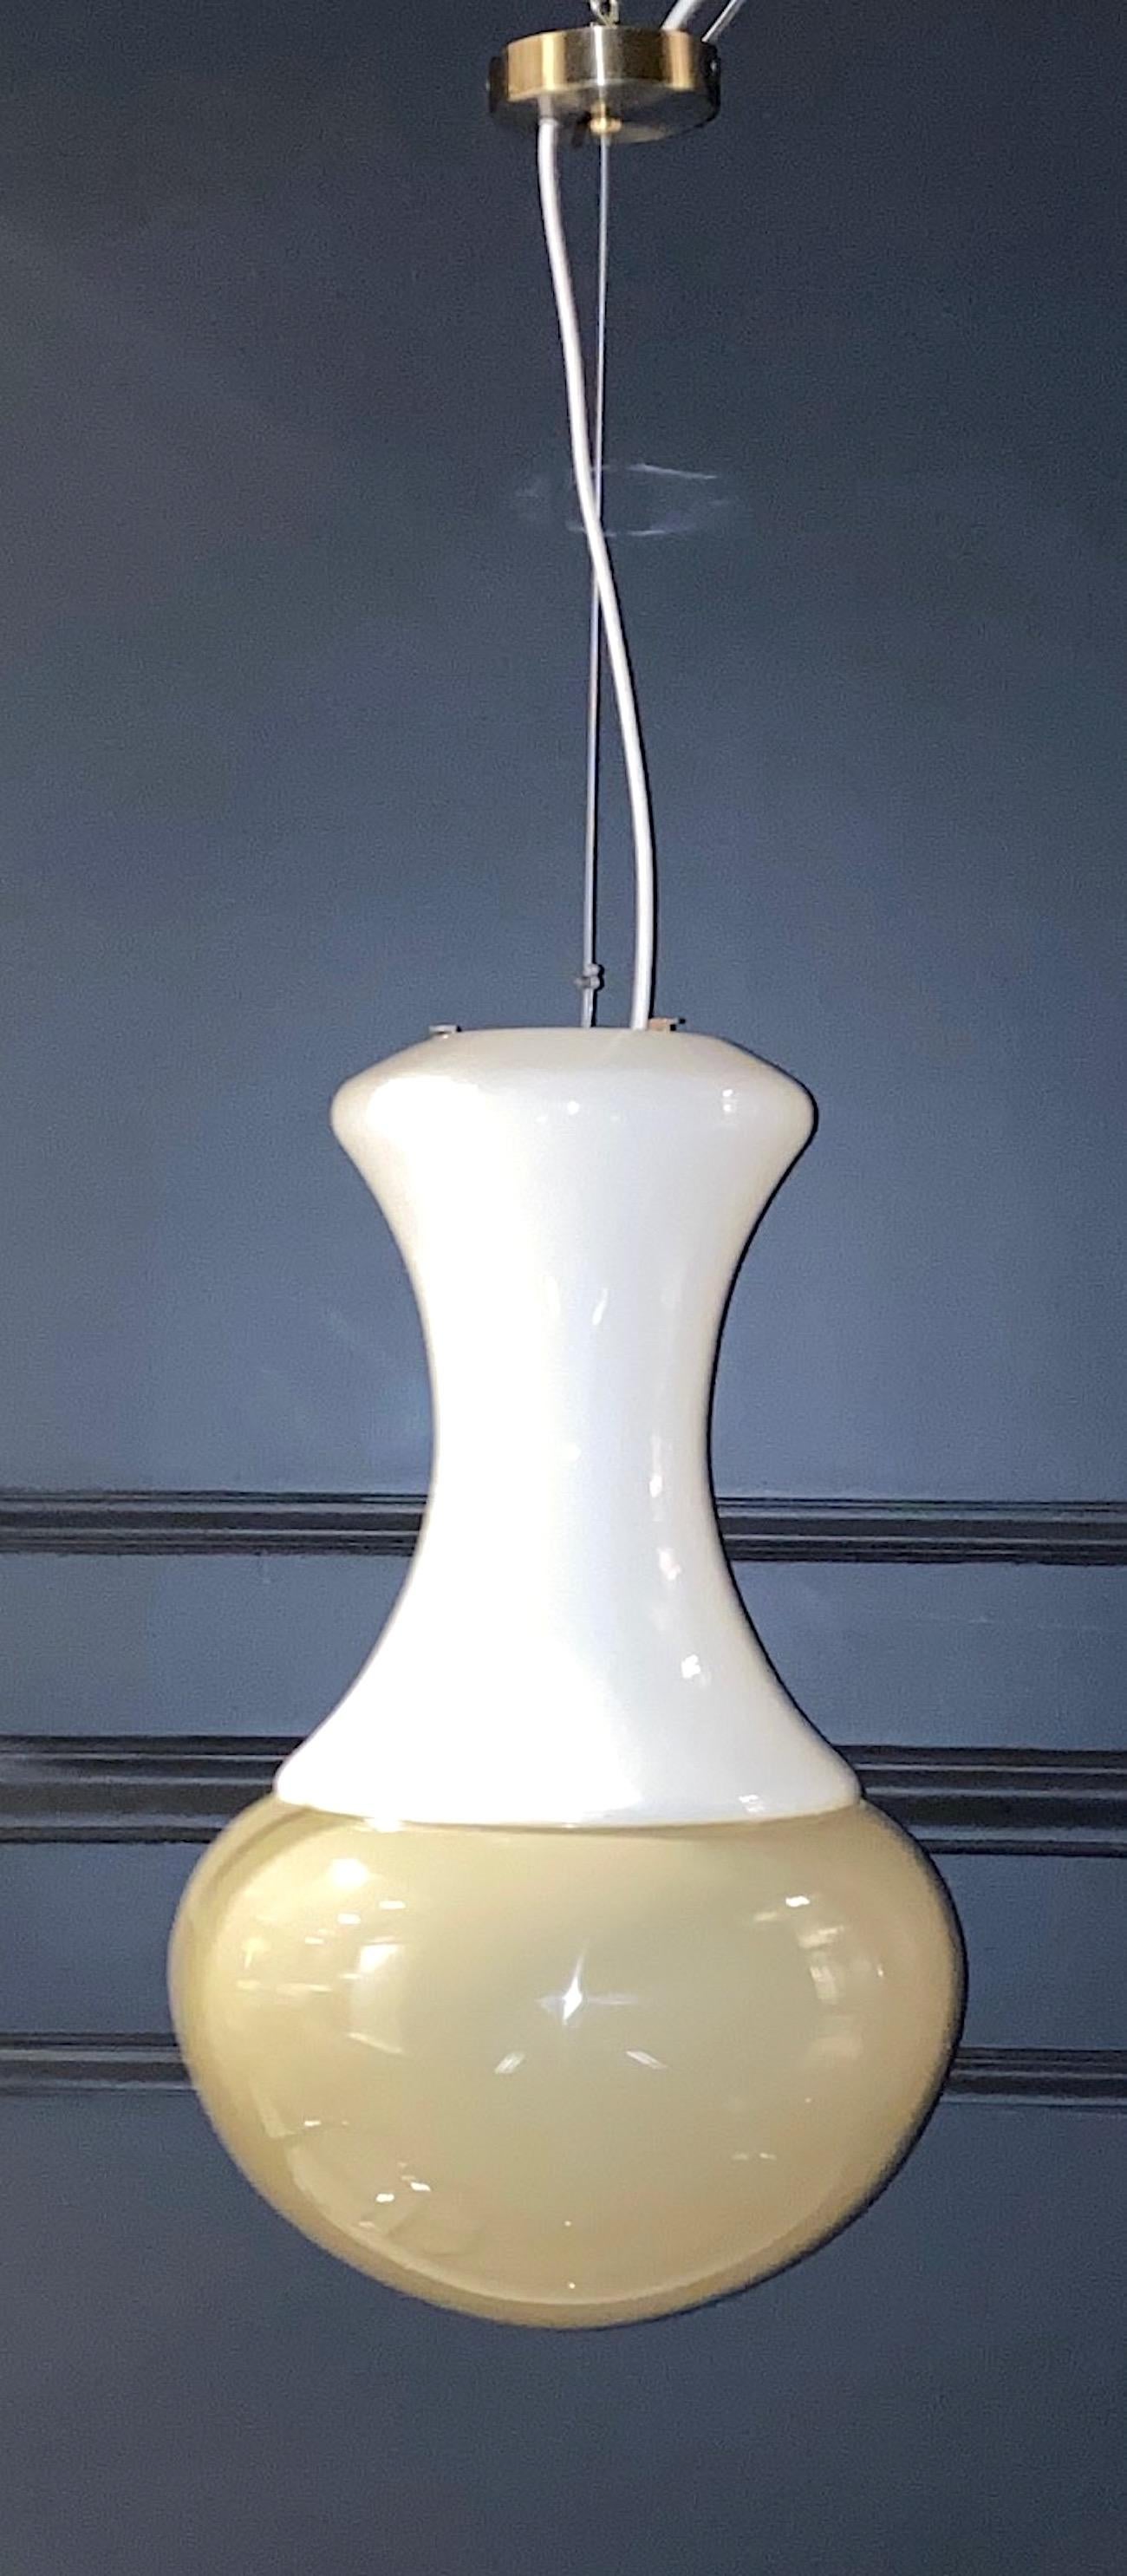 A clean and elegant design Italian Pendant light, circa 1970. The pendant is comprised of two pieces of hand blown glass made on Murano. The top is opaque white glass and the bottom is opaque taupe/beige color glass. The two pieces are glued